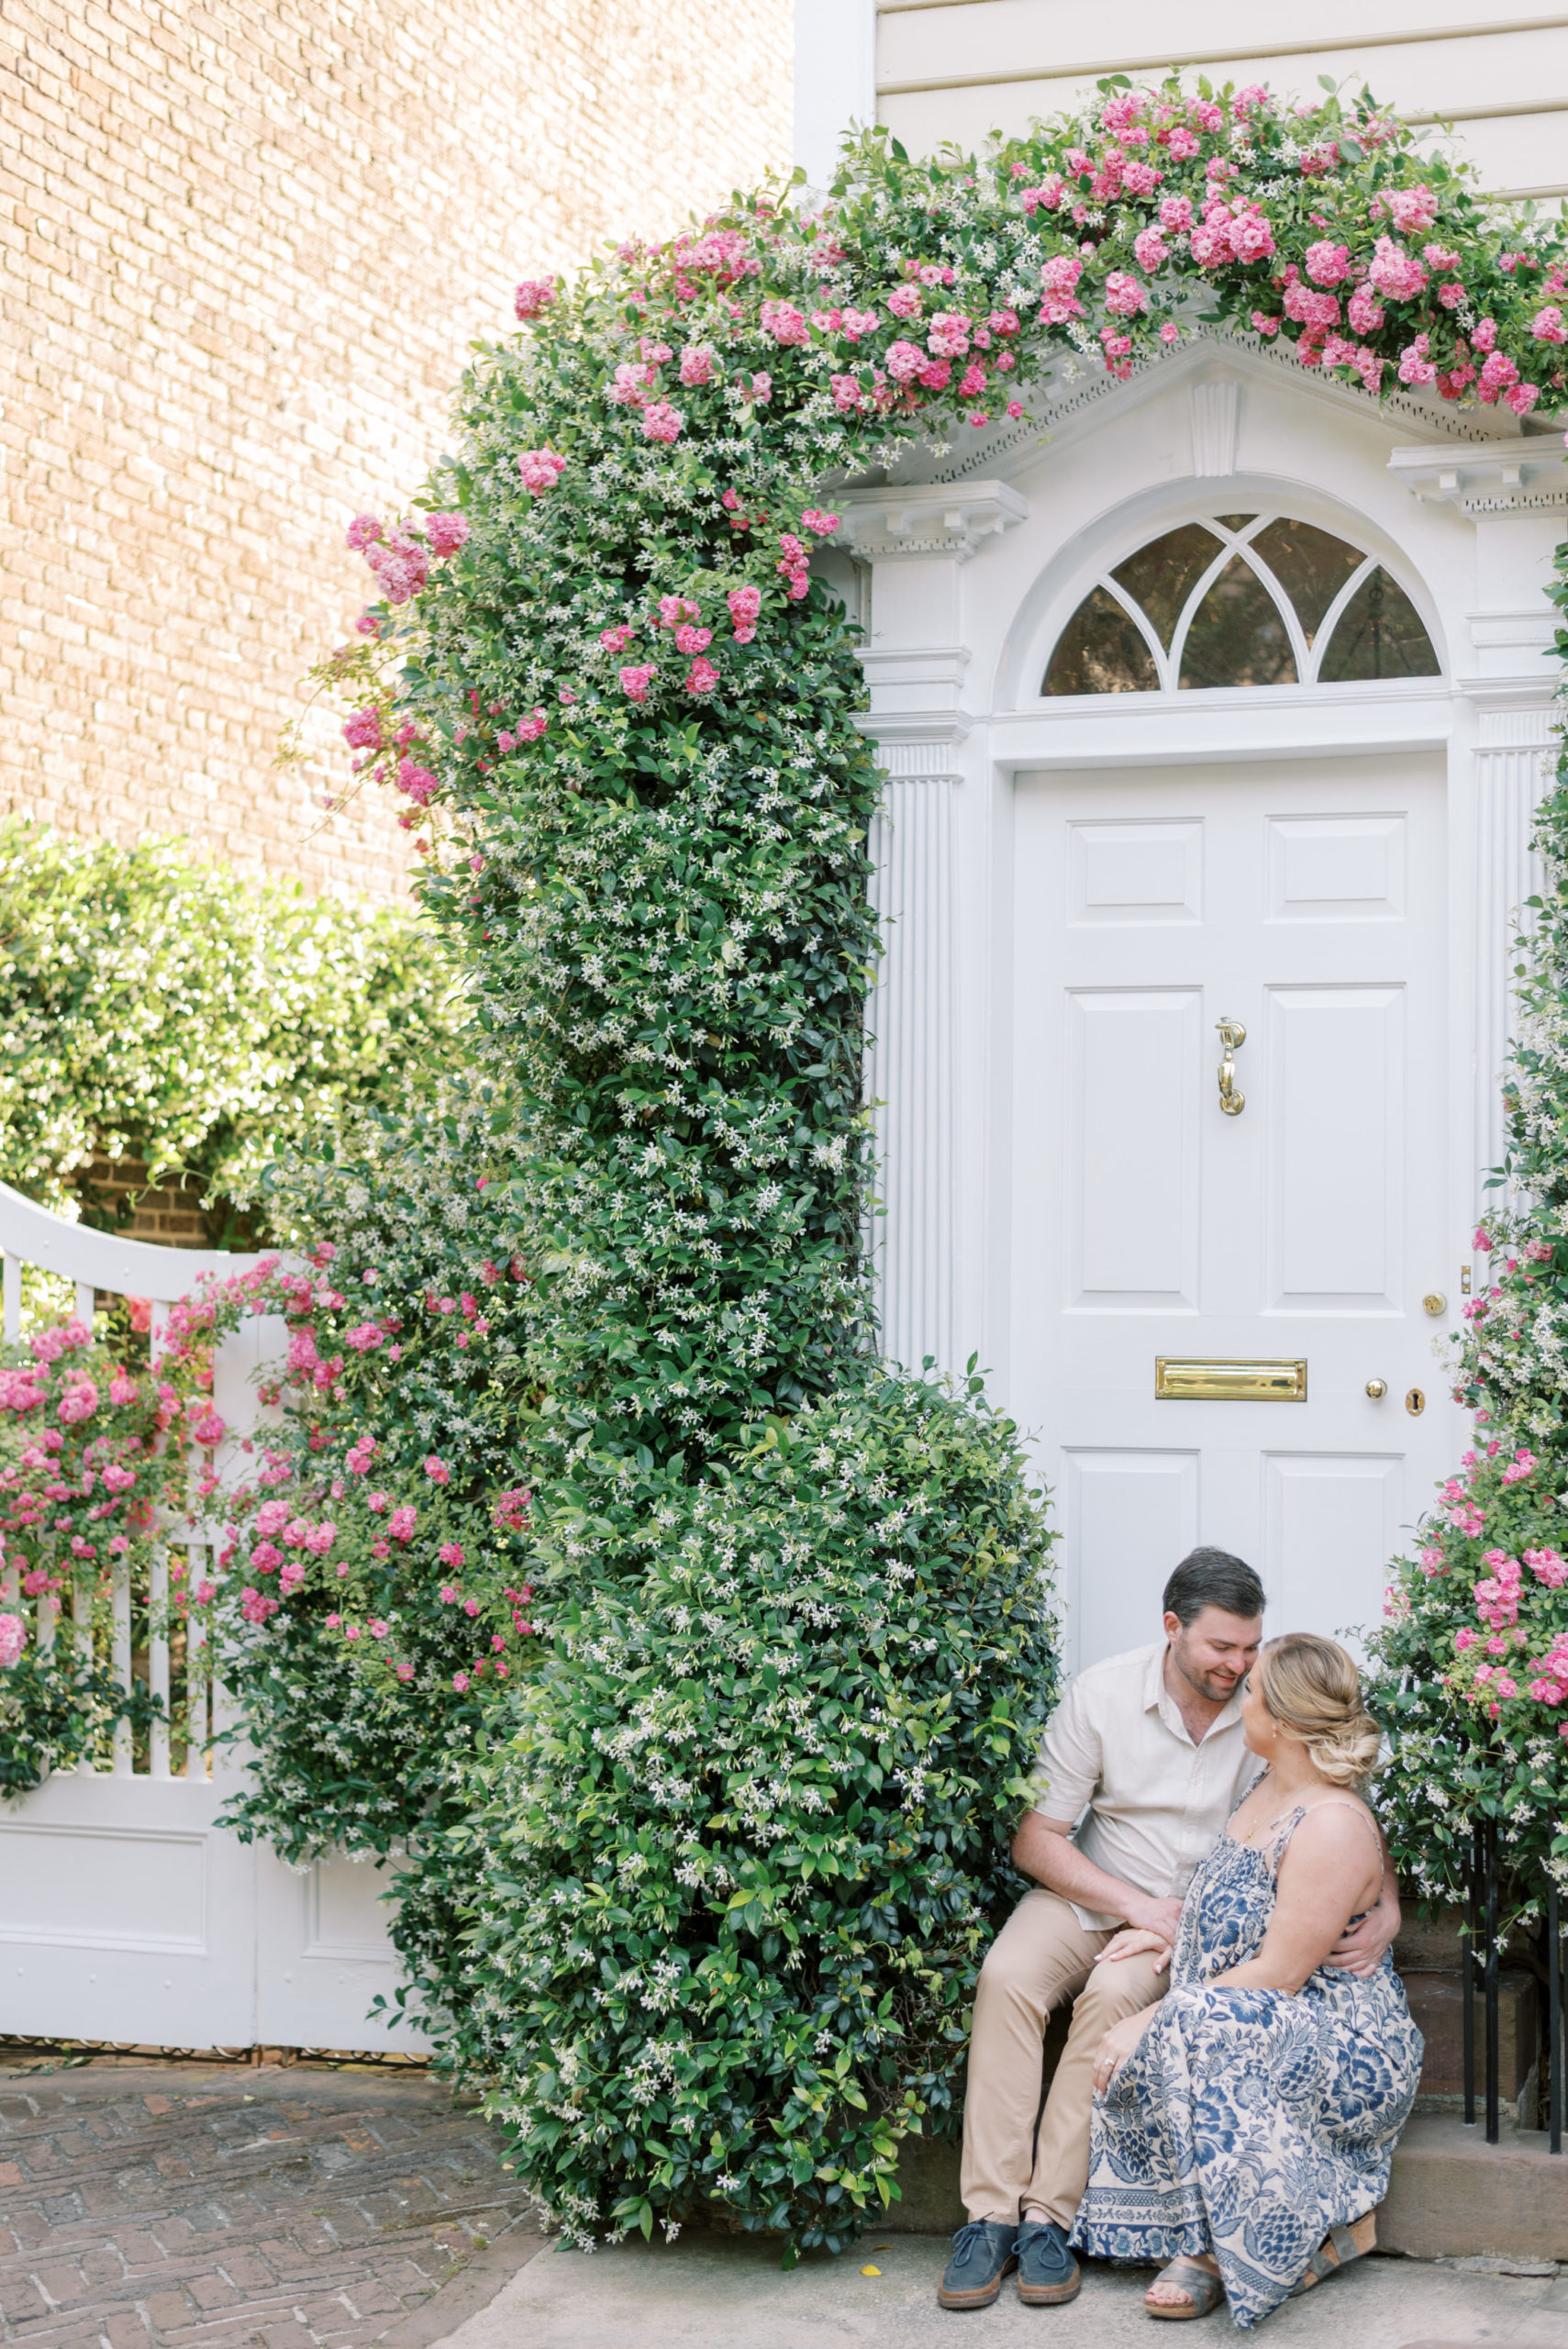 Couple sitting on a step with pink and white flowers and a white gate